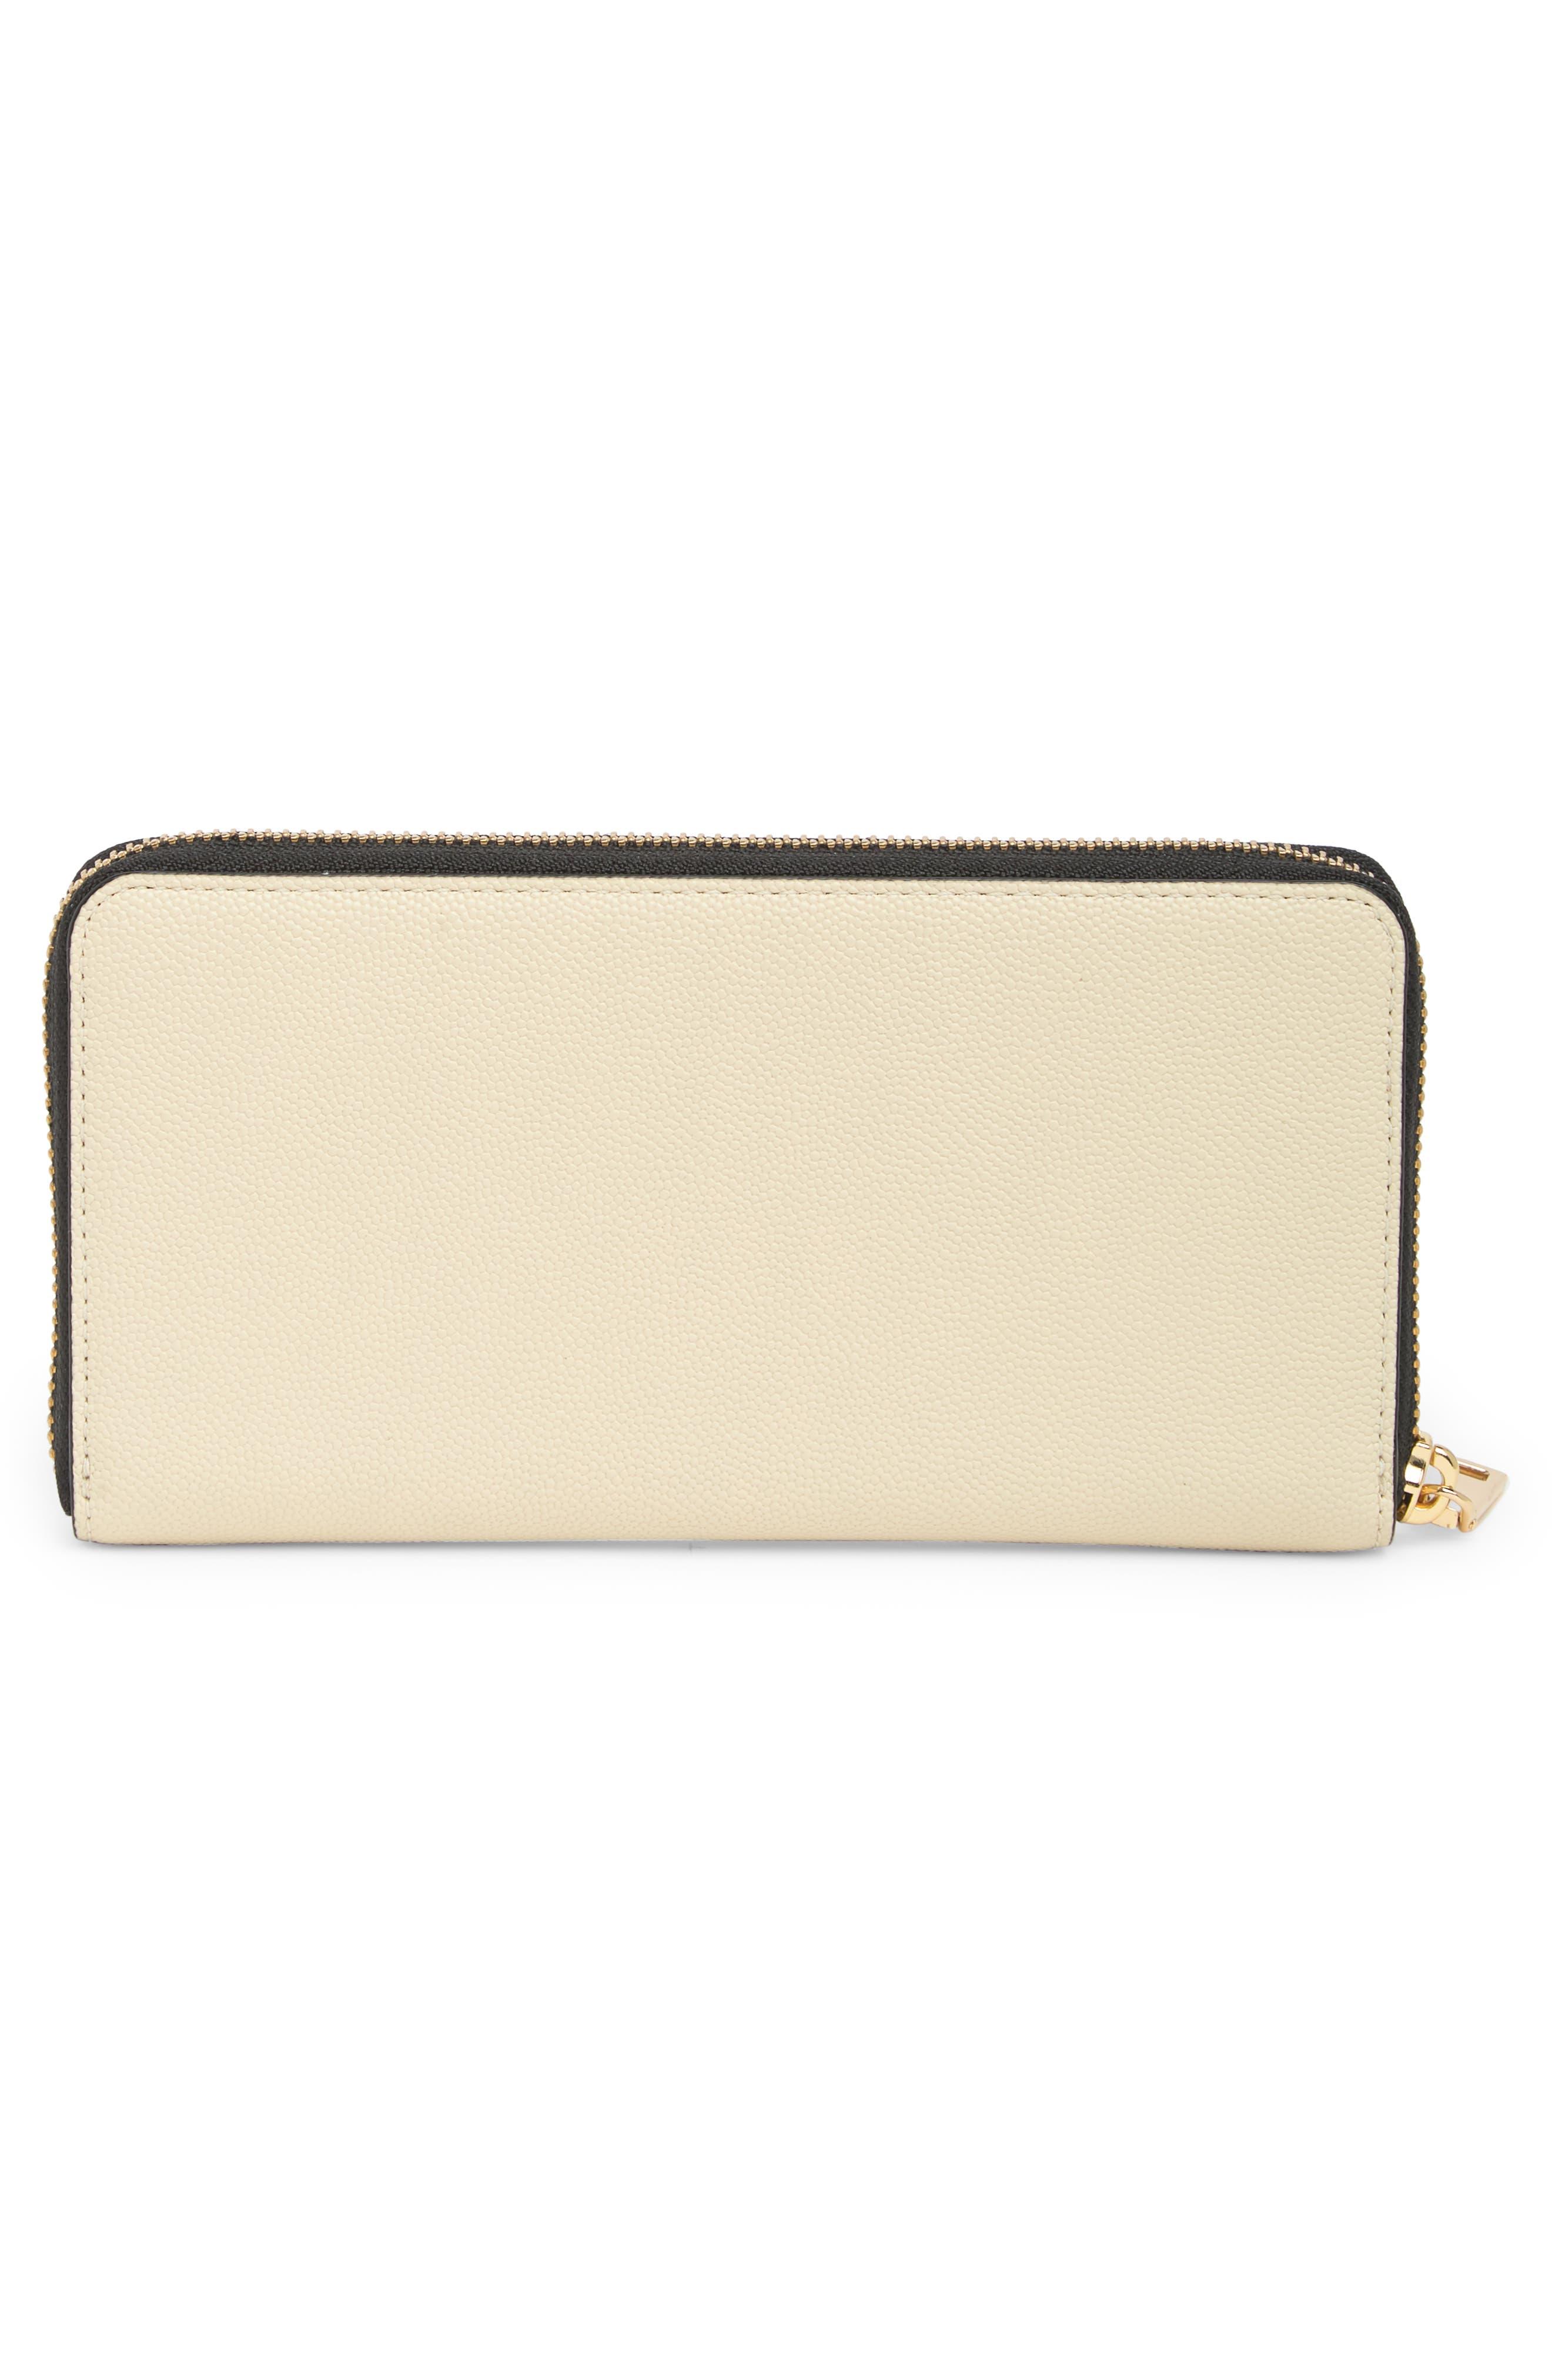 Marc Jacobs Textured Leather Continental Wallet in Natural | Lyst